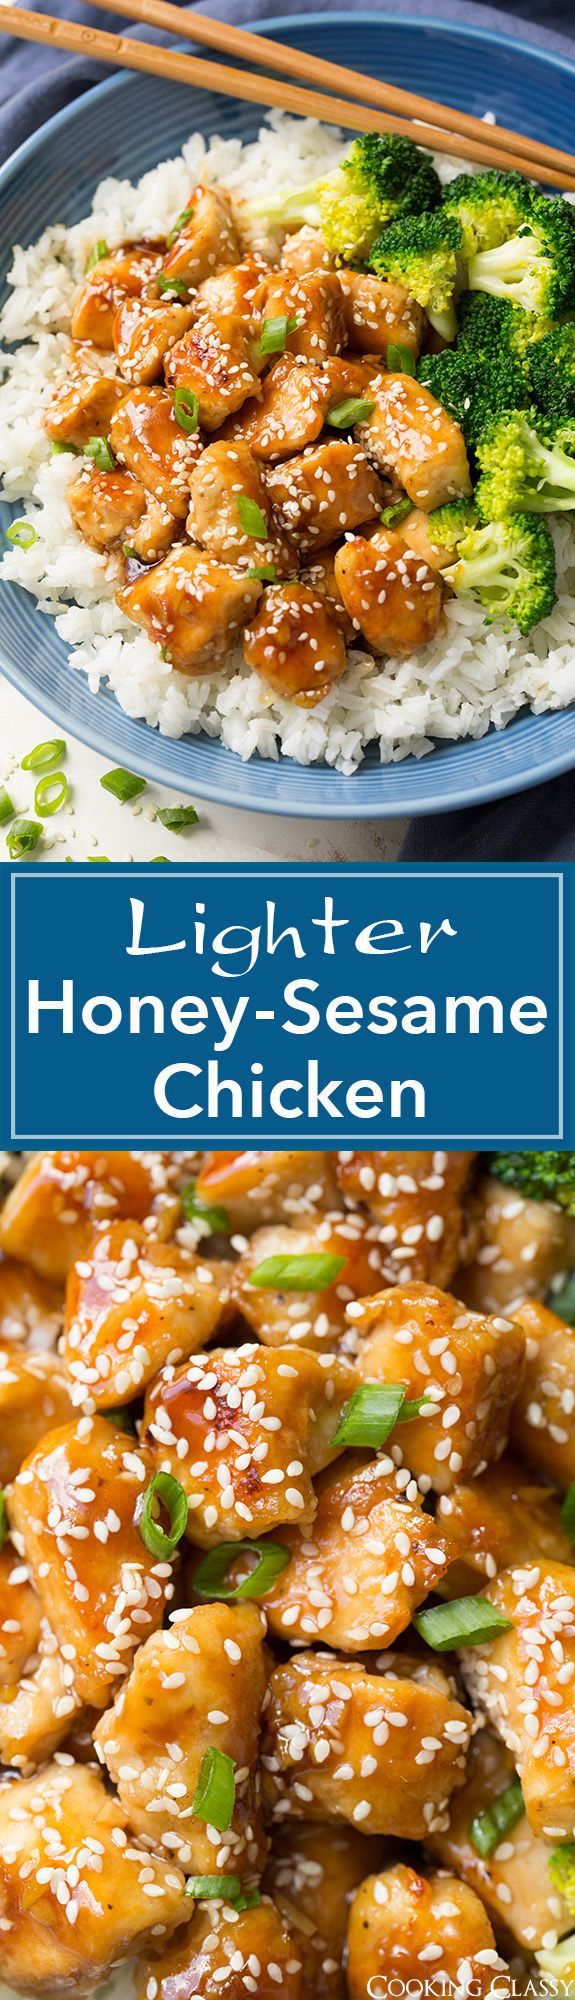 Lighter Honey-Sesame Chicken – you won’t even miss the frying! Seriously delicious and full of flavor!